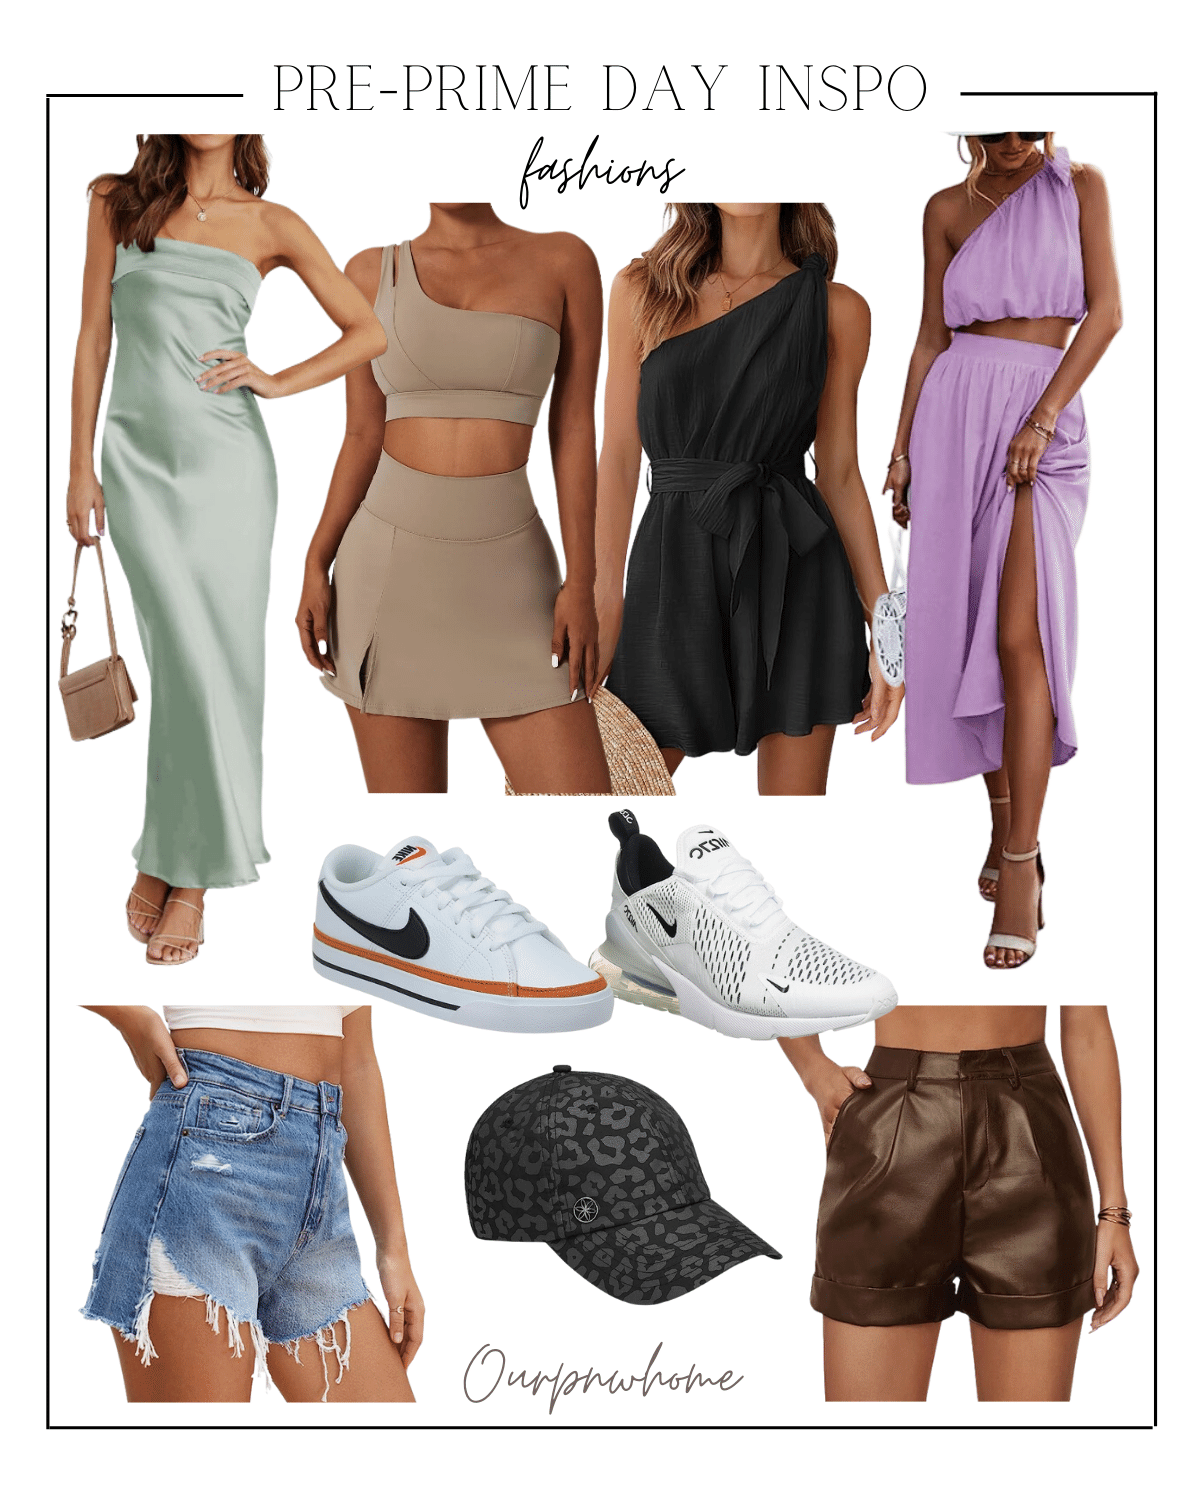 prime day, prime day essentials, womens fashion, athletic wear, summer outfit inspo, womens dresses, shorts, sneakers, hats 